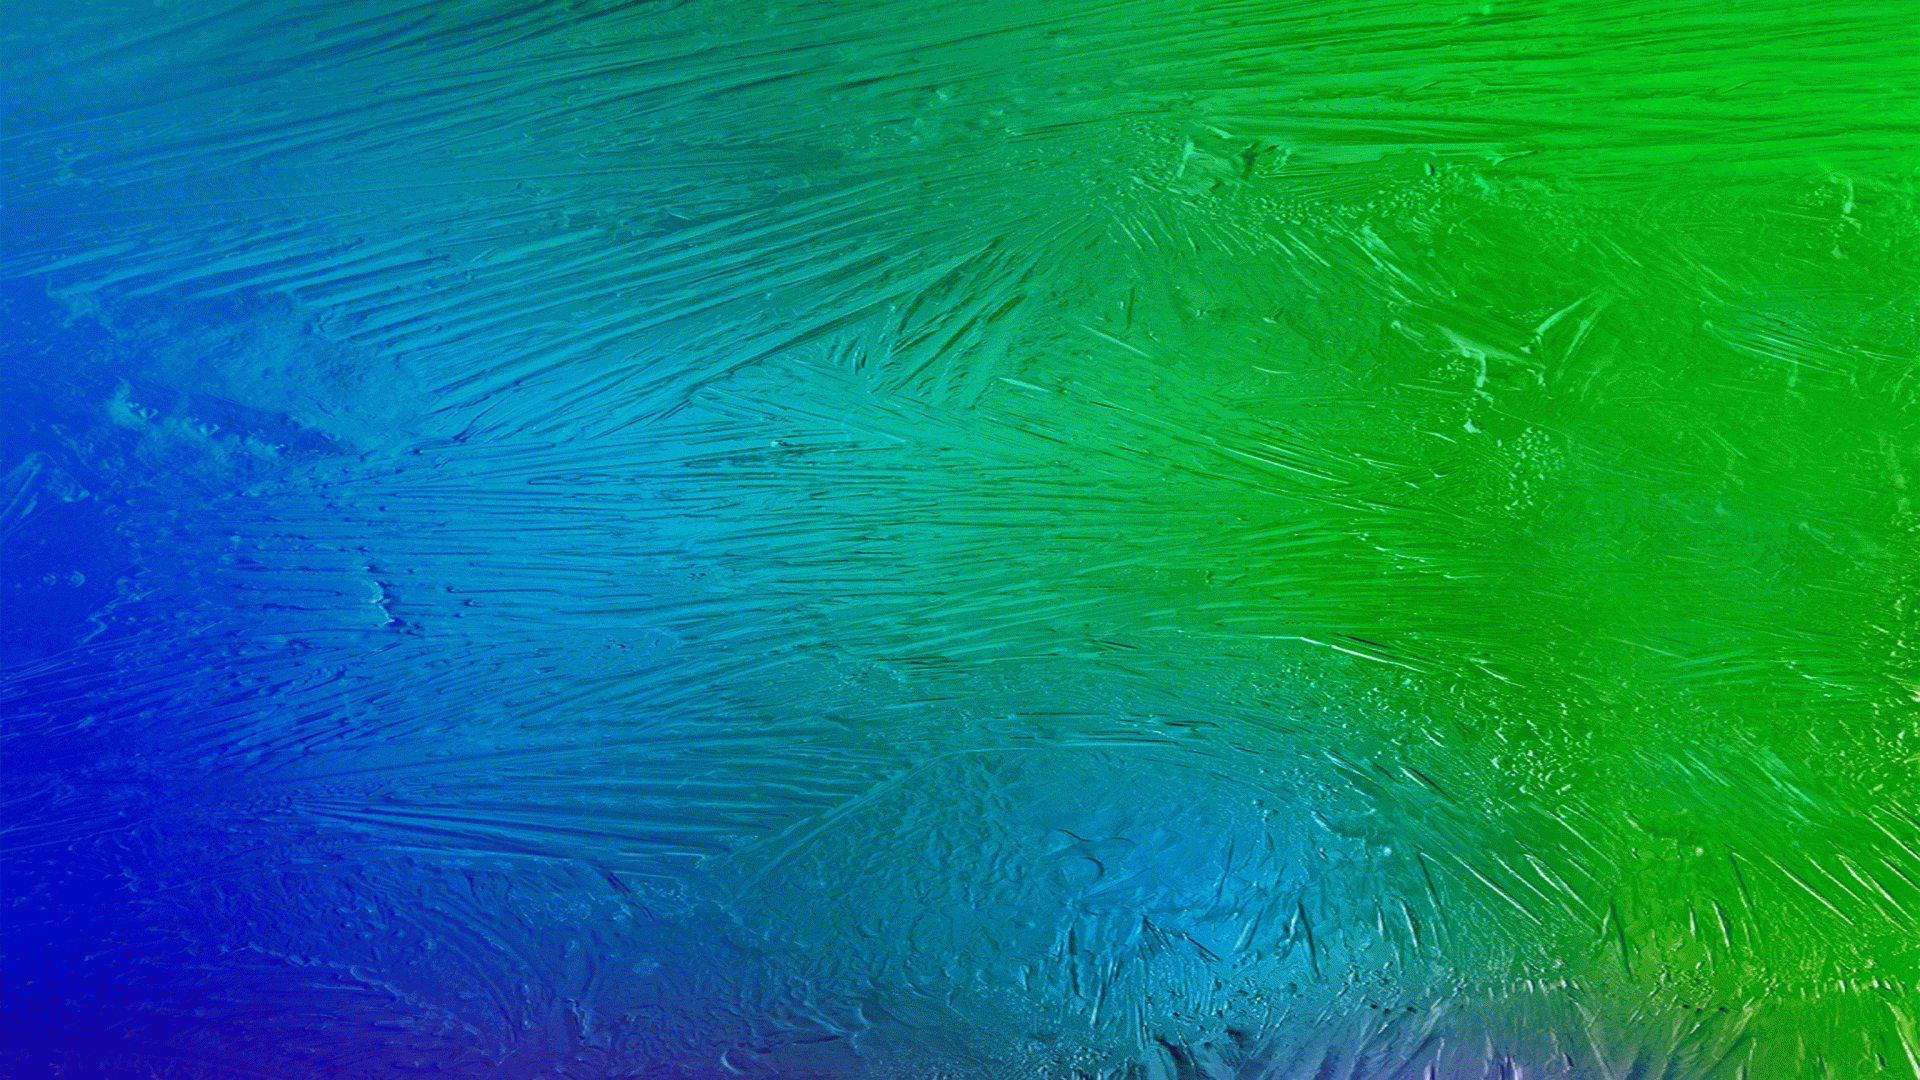 Download wallpaper 1920x1080 pattern, texture, green and blue, gradient,  surface, full hd, hdtv, fhd, 1080p wallpaper, 1920x1080 hd background, 7904